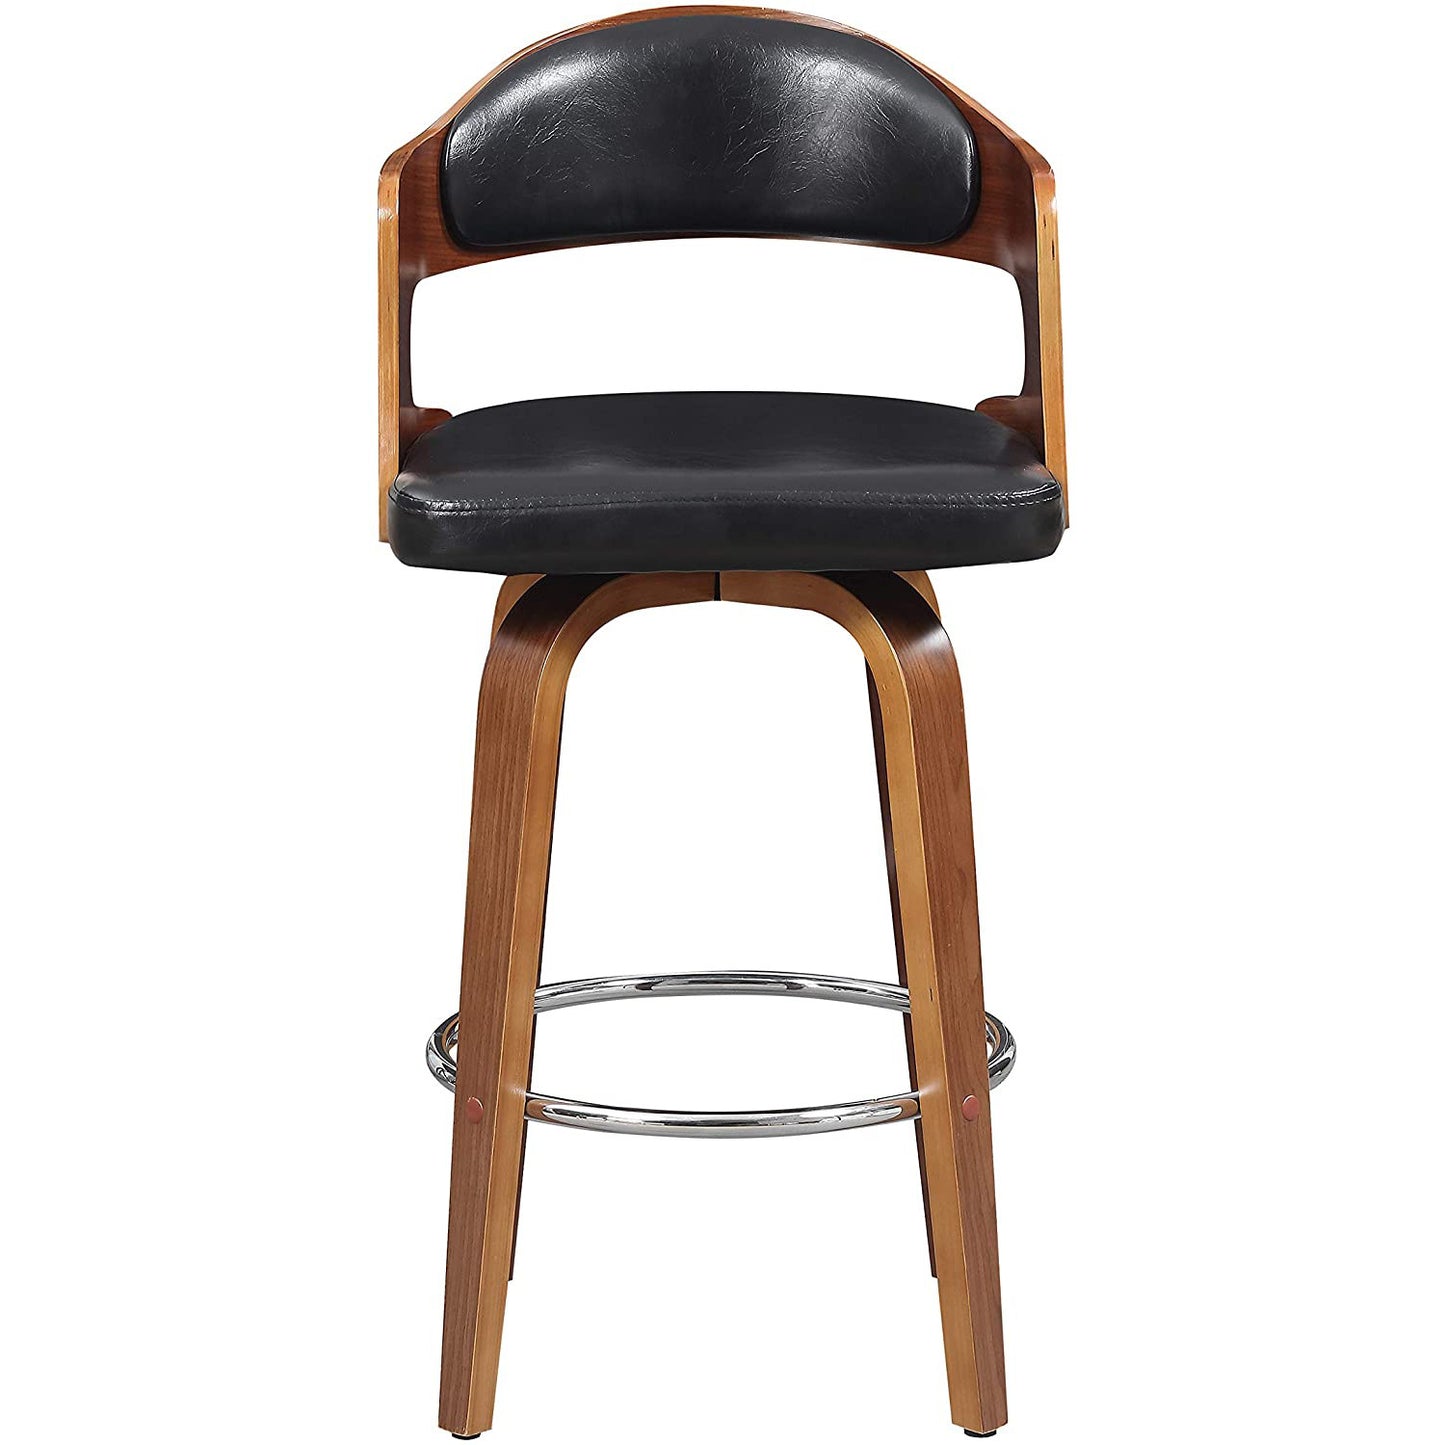 ACBS09 Wood And Faux Leather Swivel Barstool